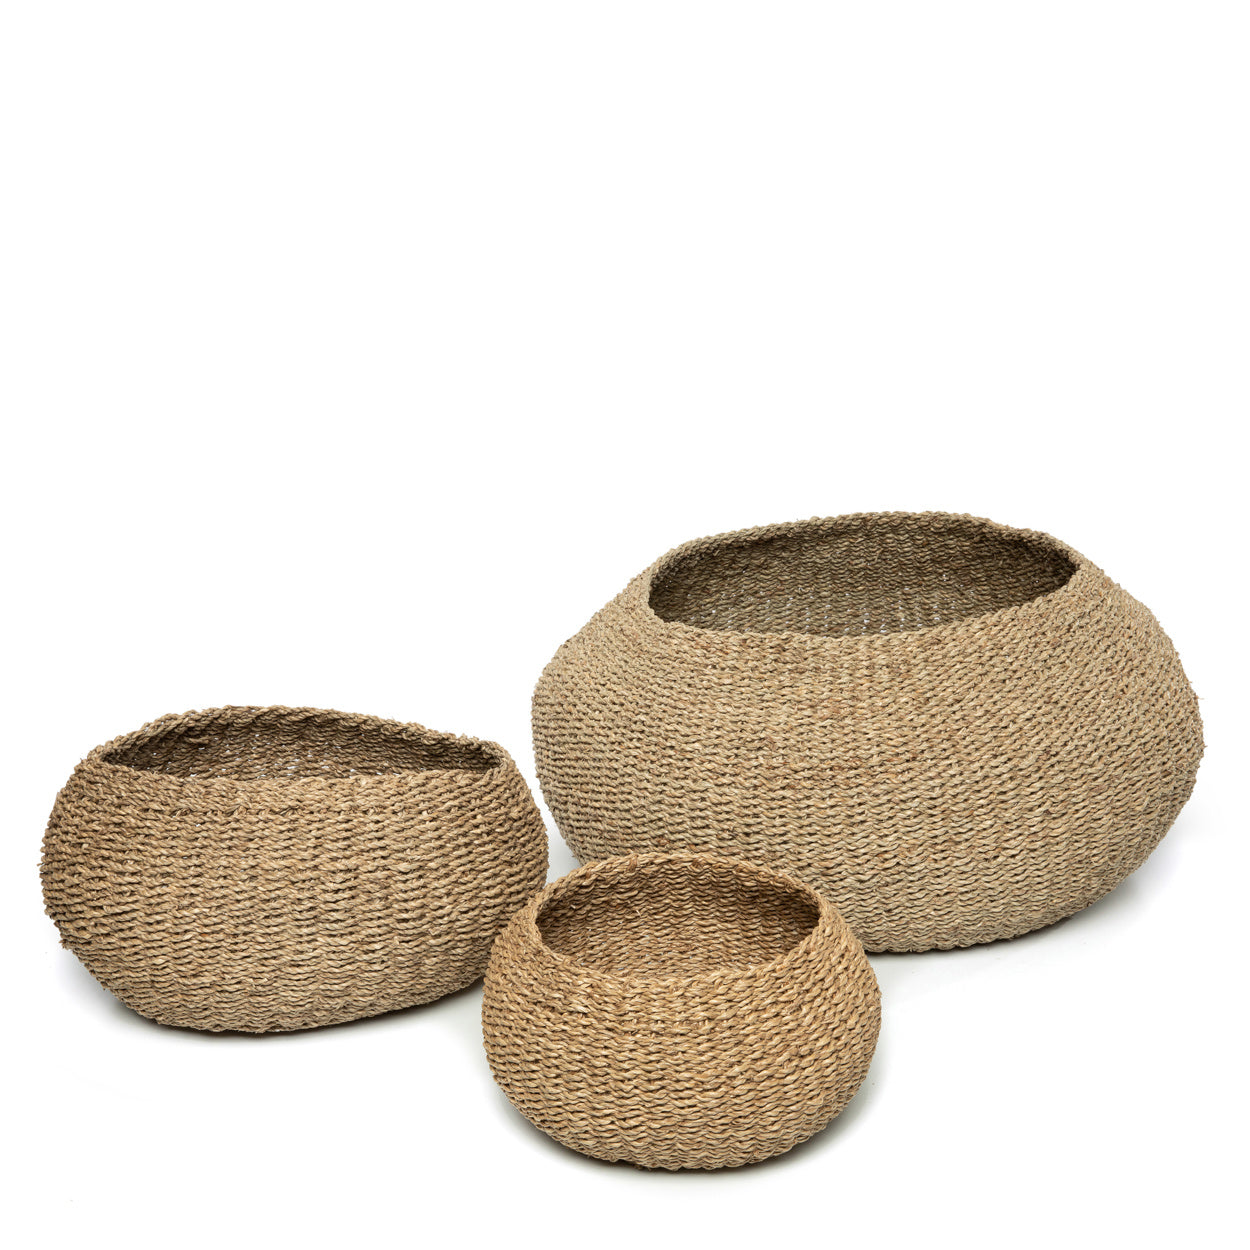 THE HO COC Baskets Set of 3 front view